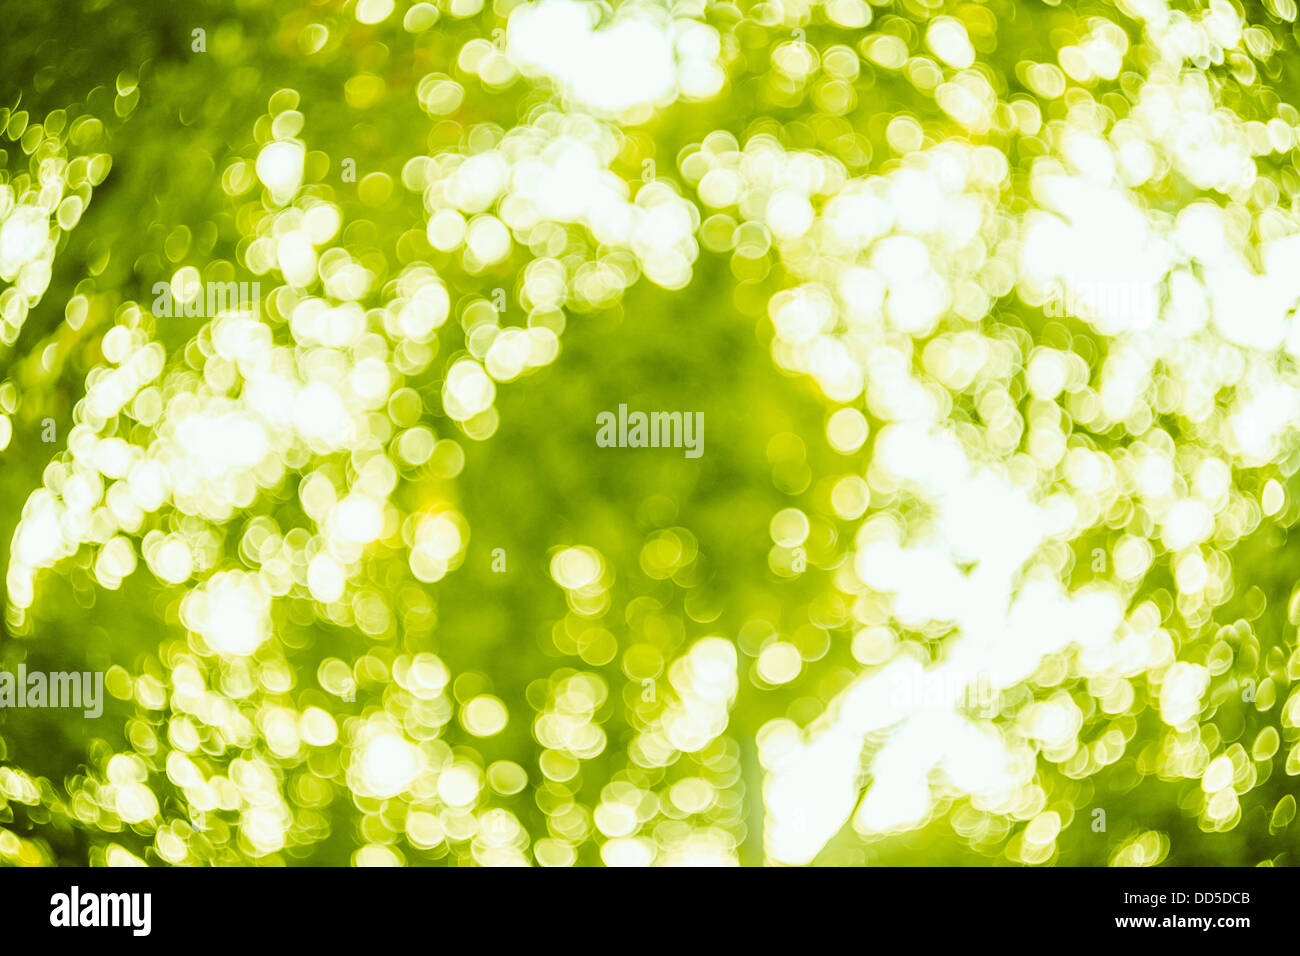 Blurred Lights Background Bright Green Spring Bokeh Abstract